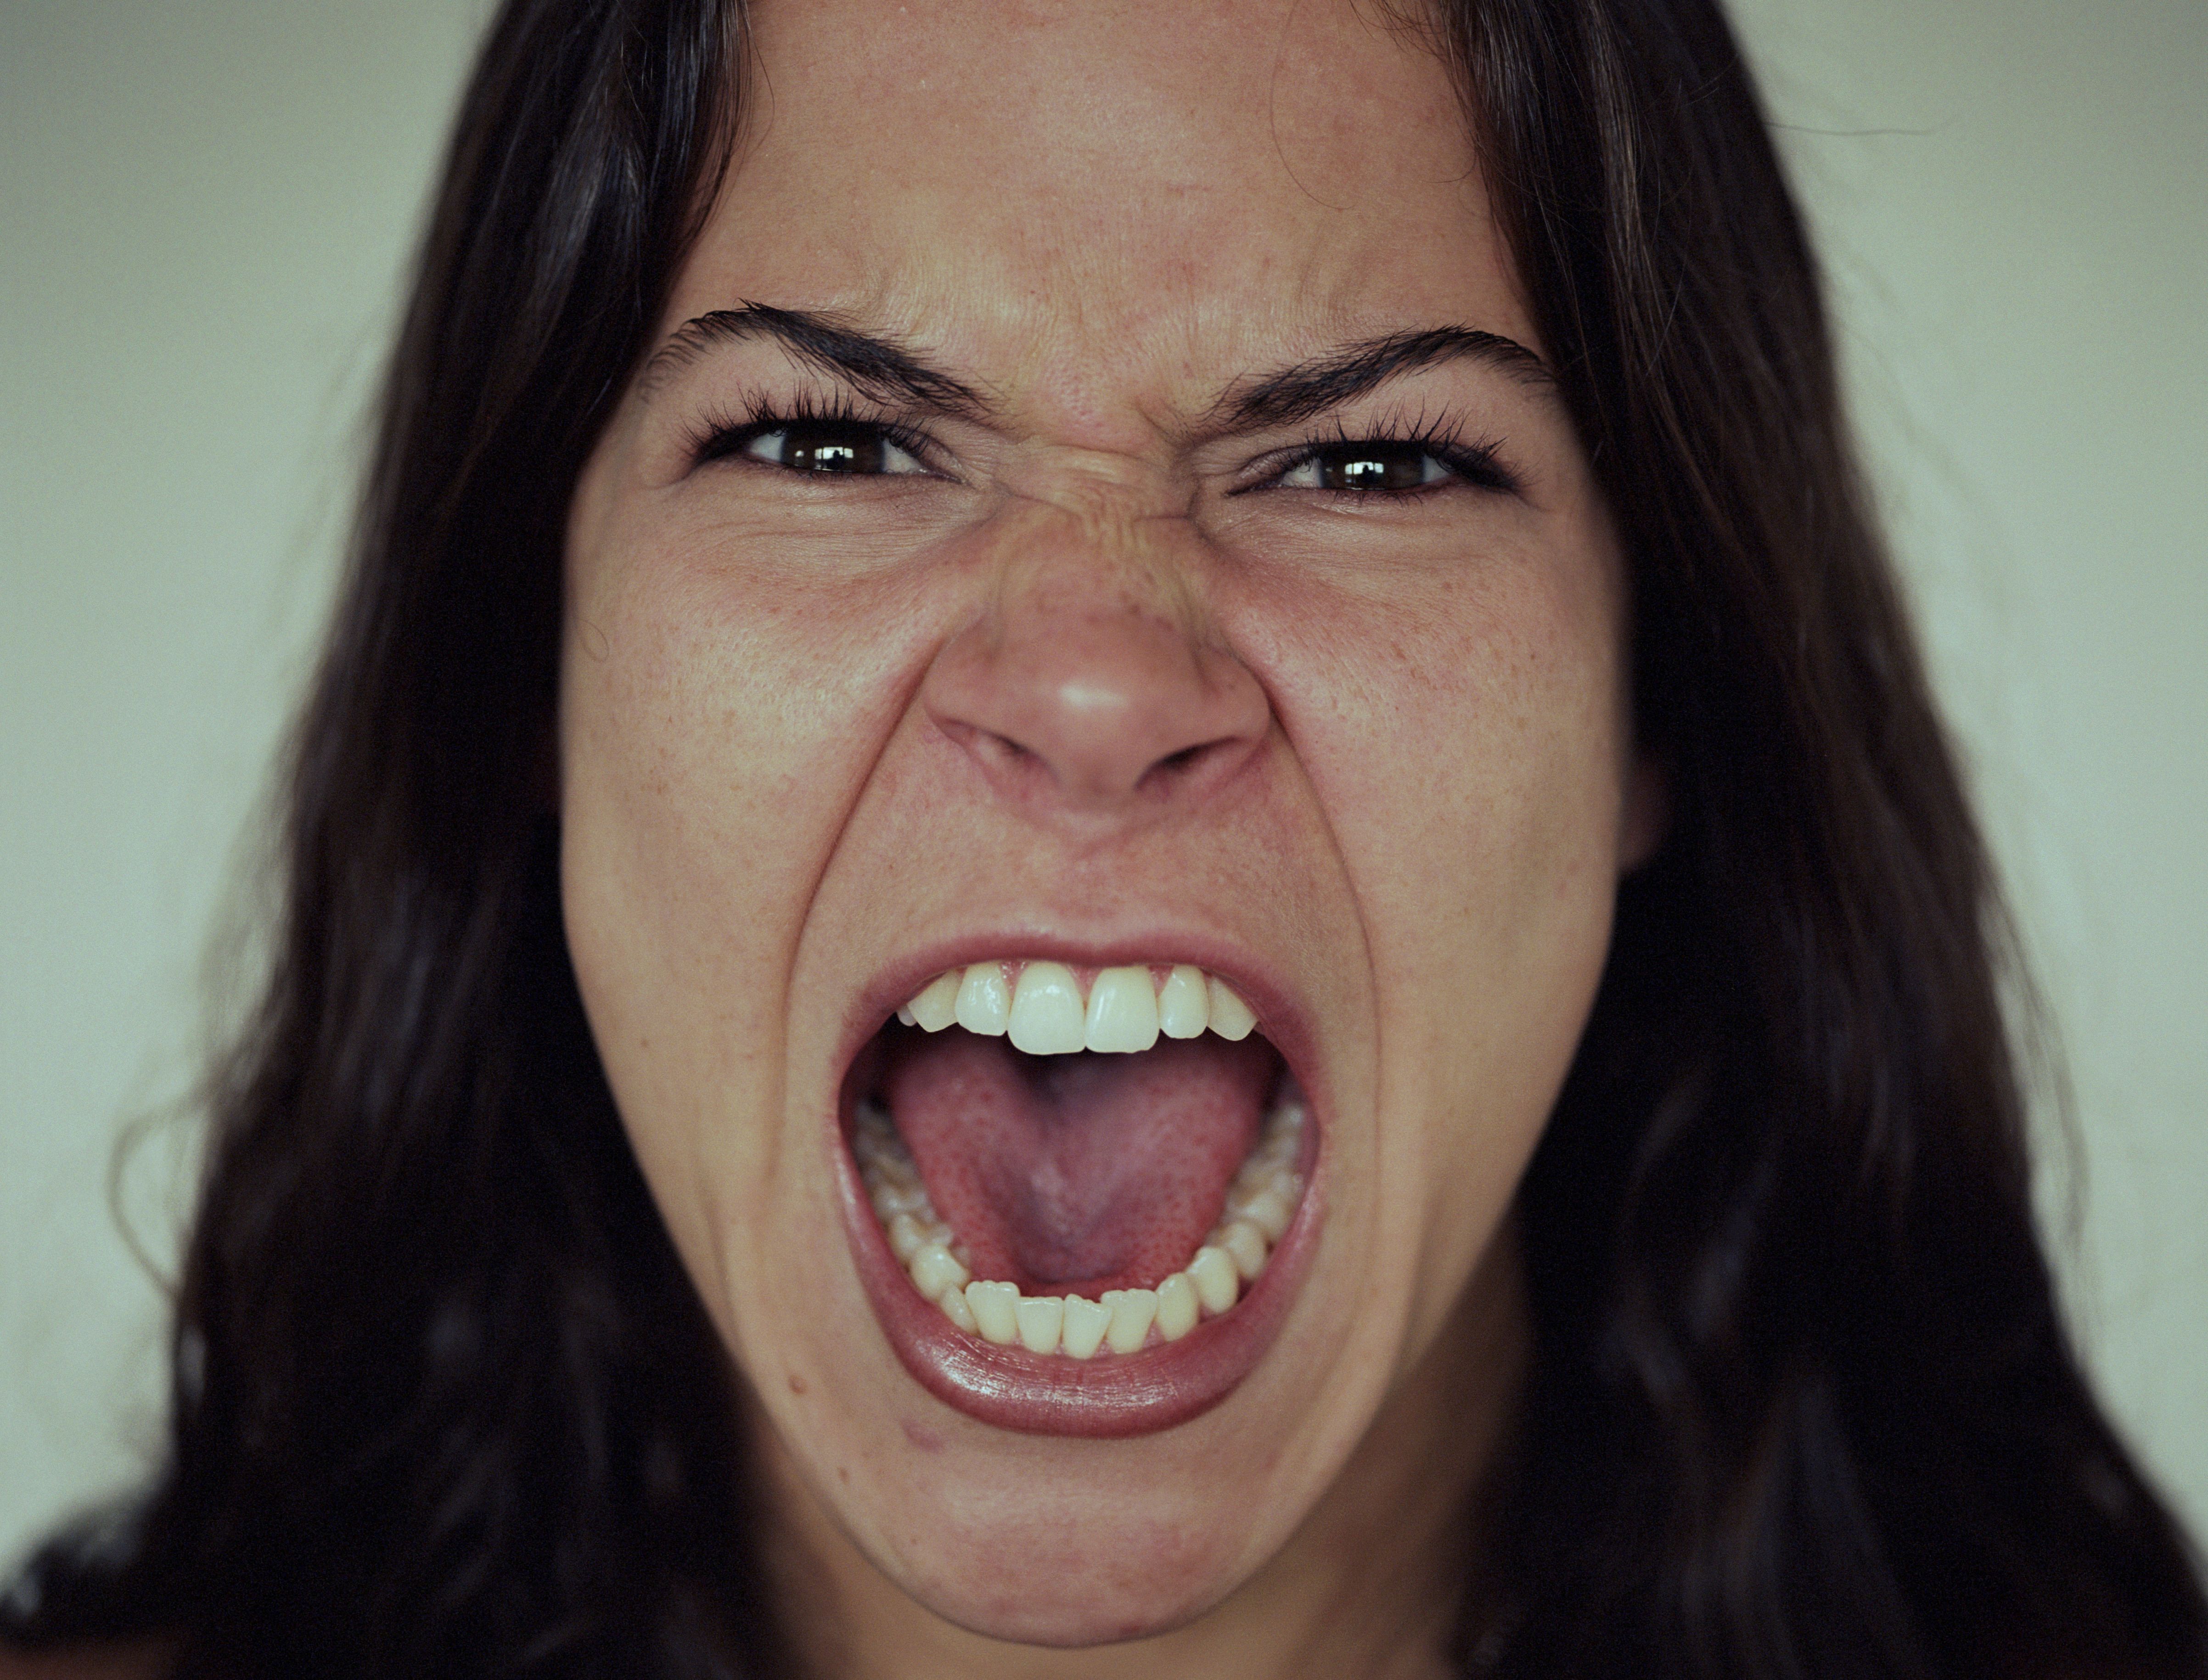 An angry woman shouting | Source: Getty Images